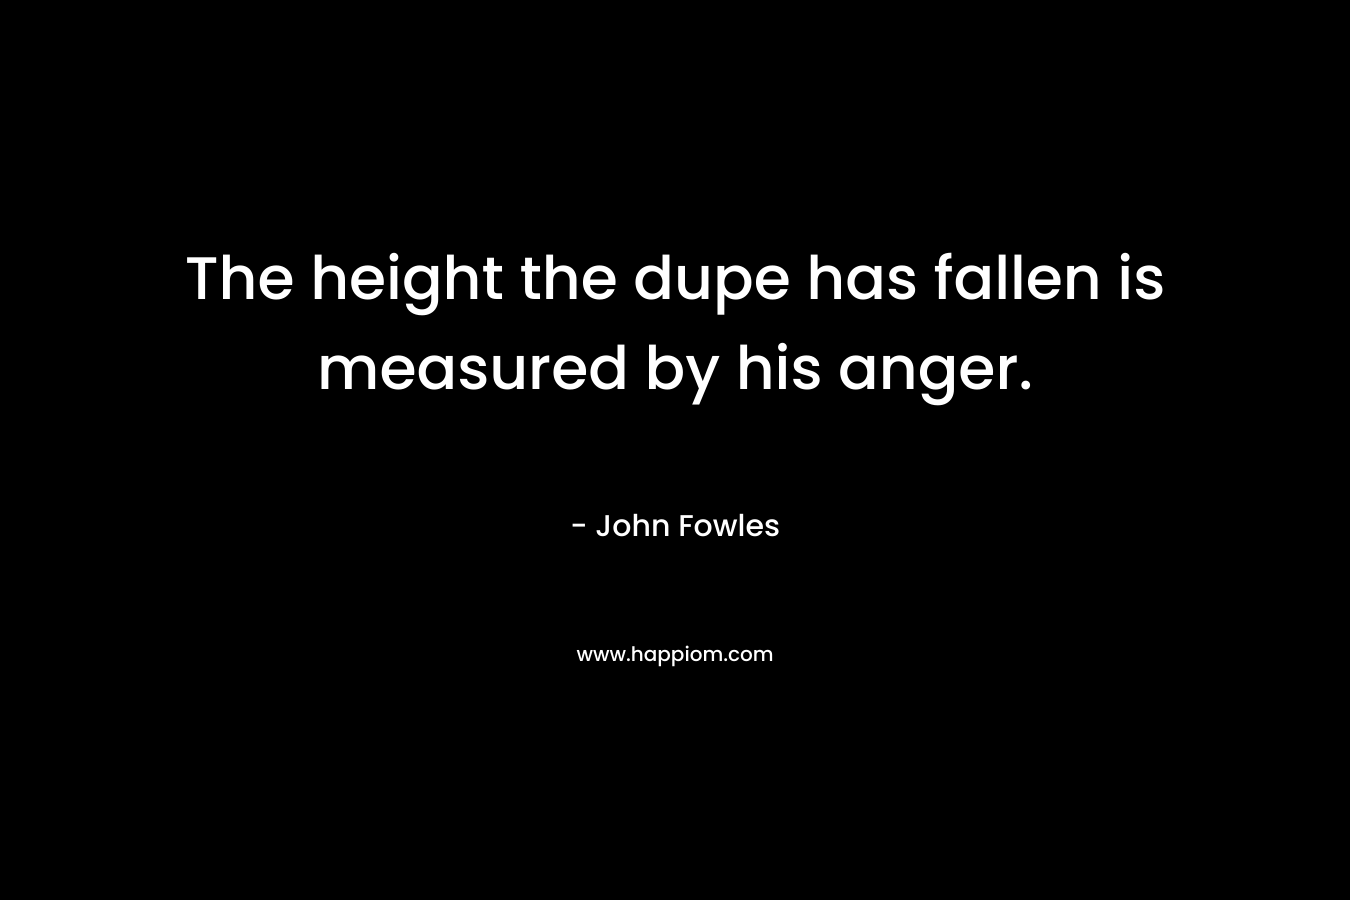 The height the dupe has fallen is measured by his anger. – John Fowles